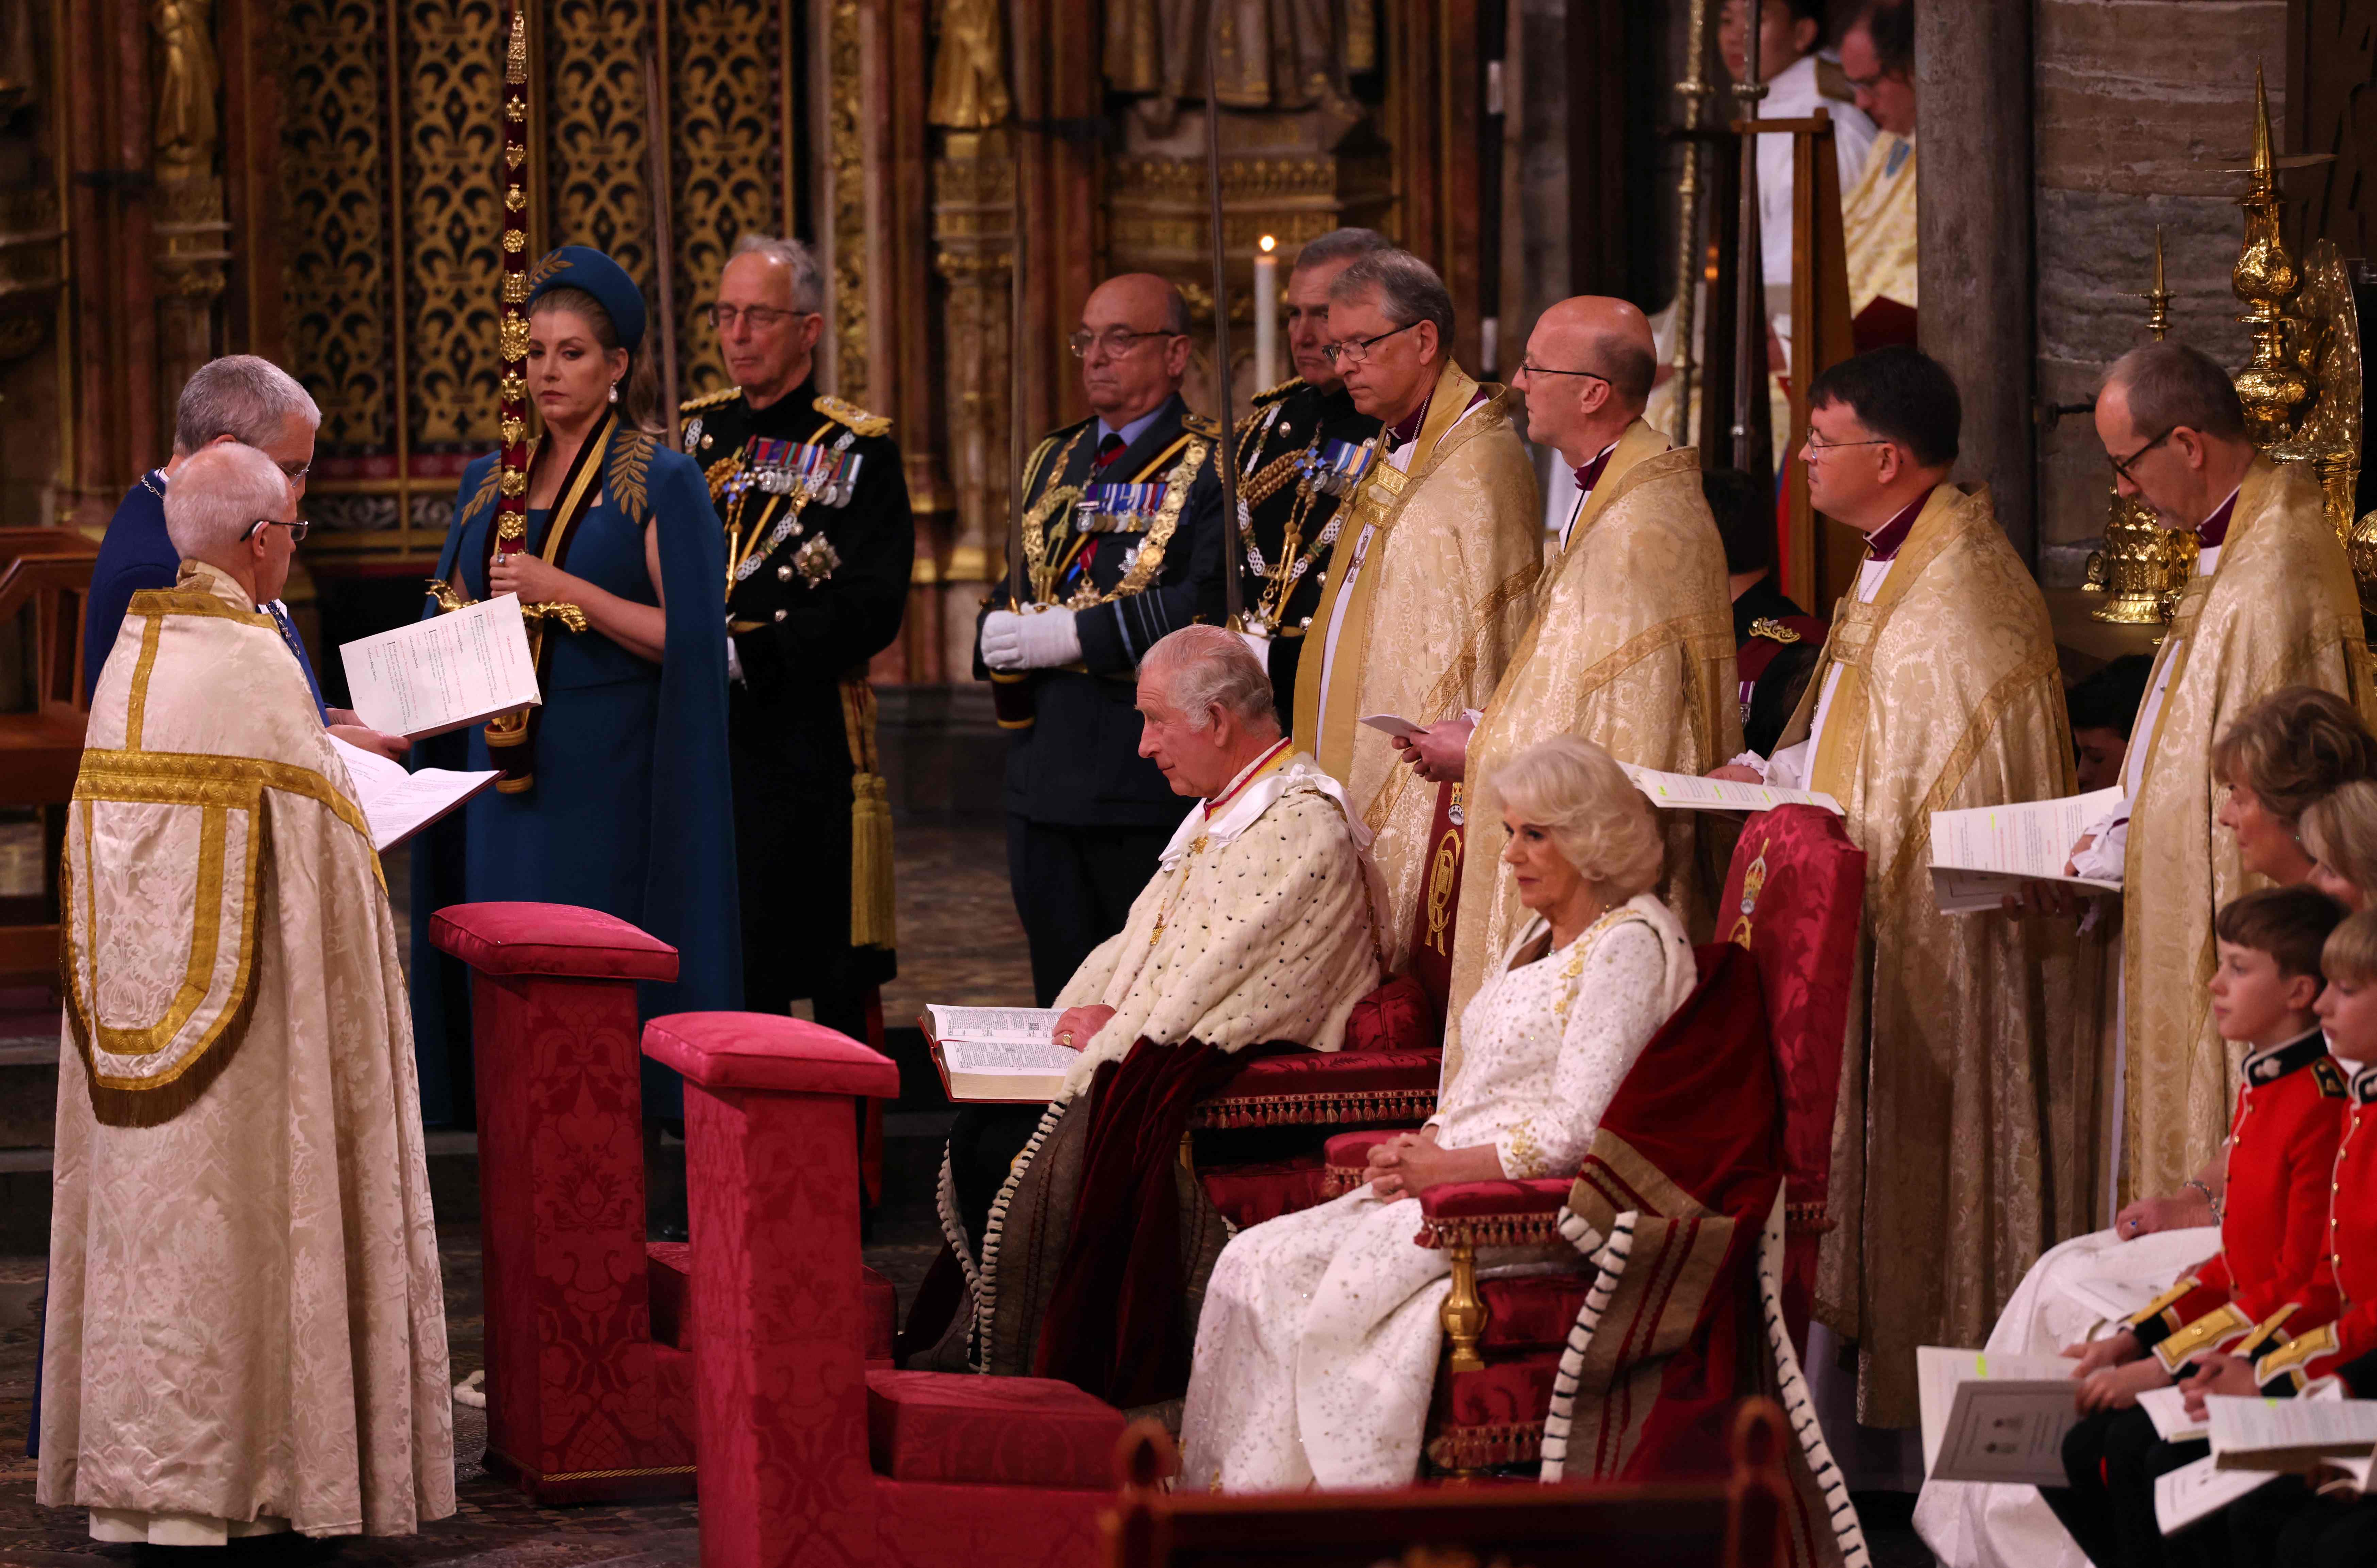 King Charles and his wife Camilla Parker are being read before their coronation